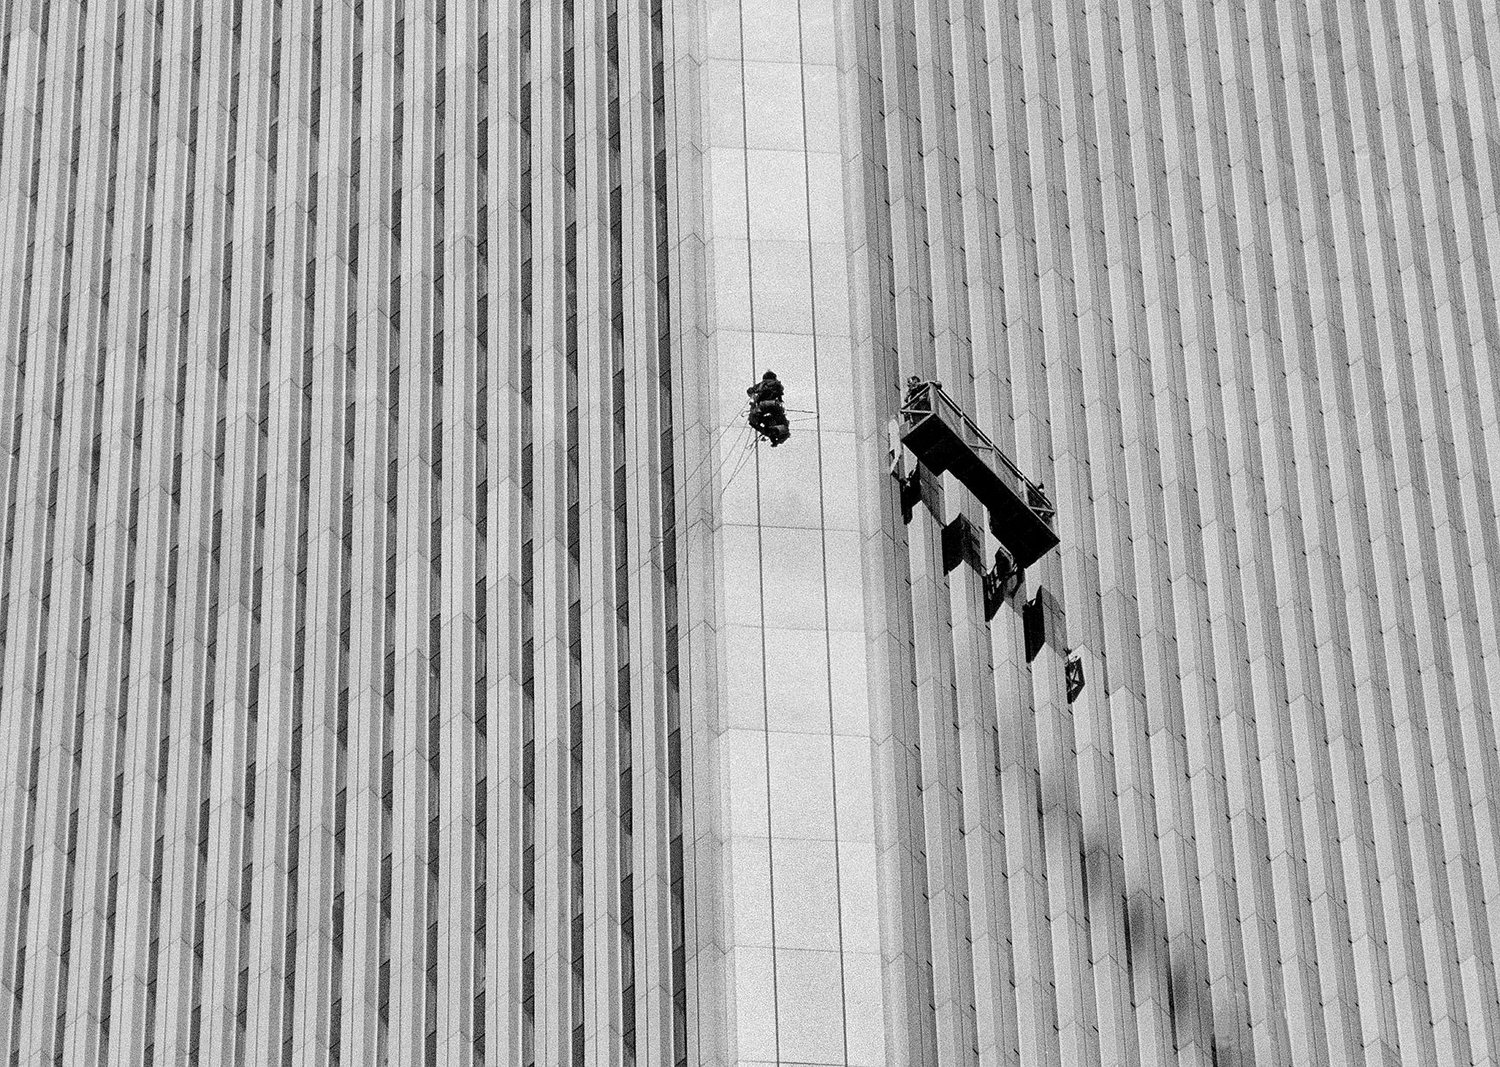 People Jumping From Wtc